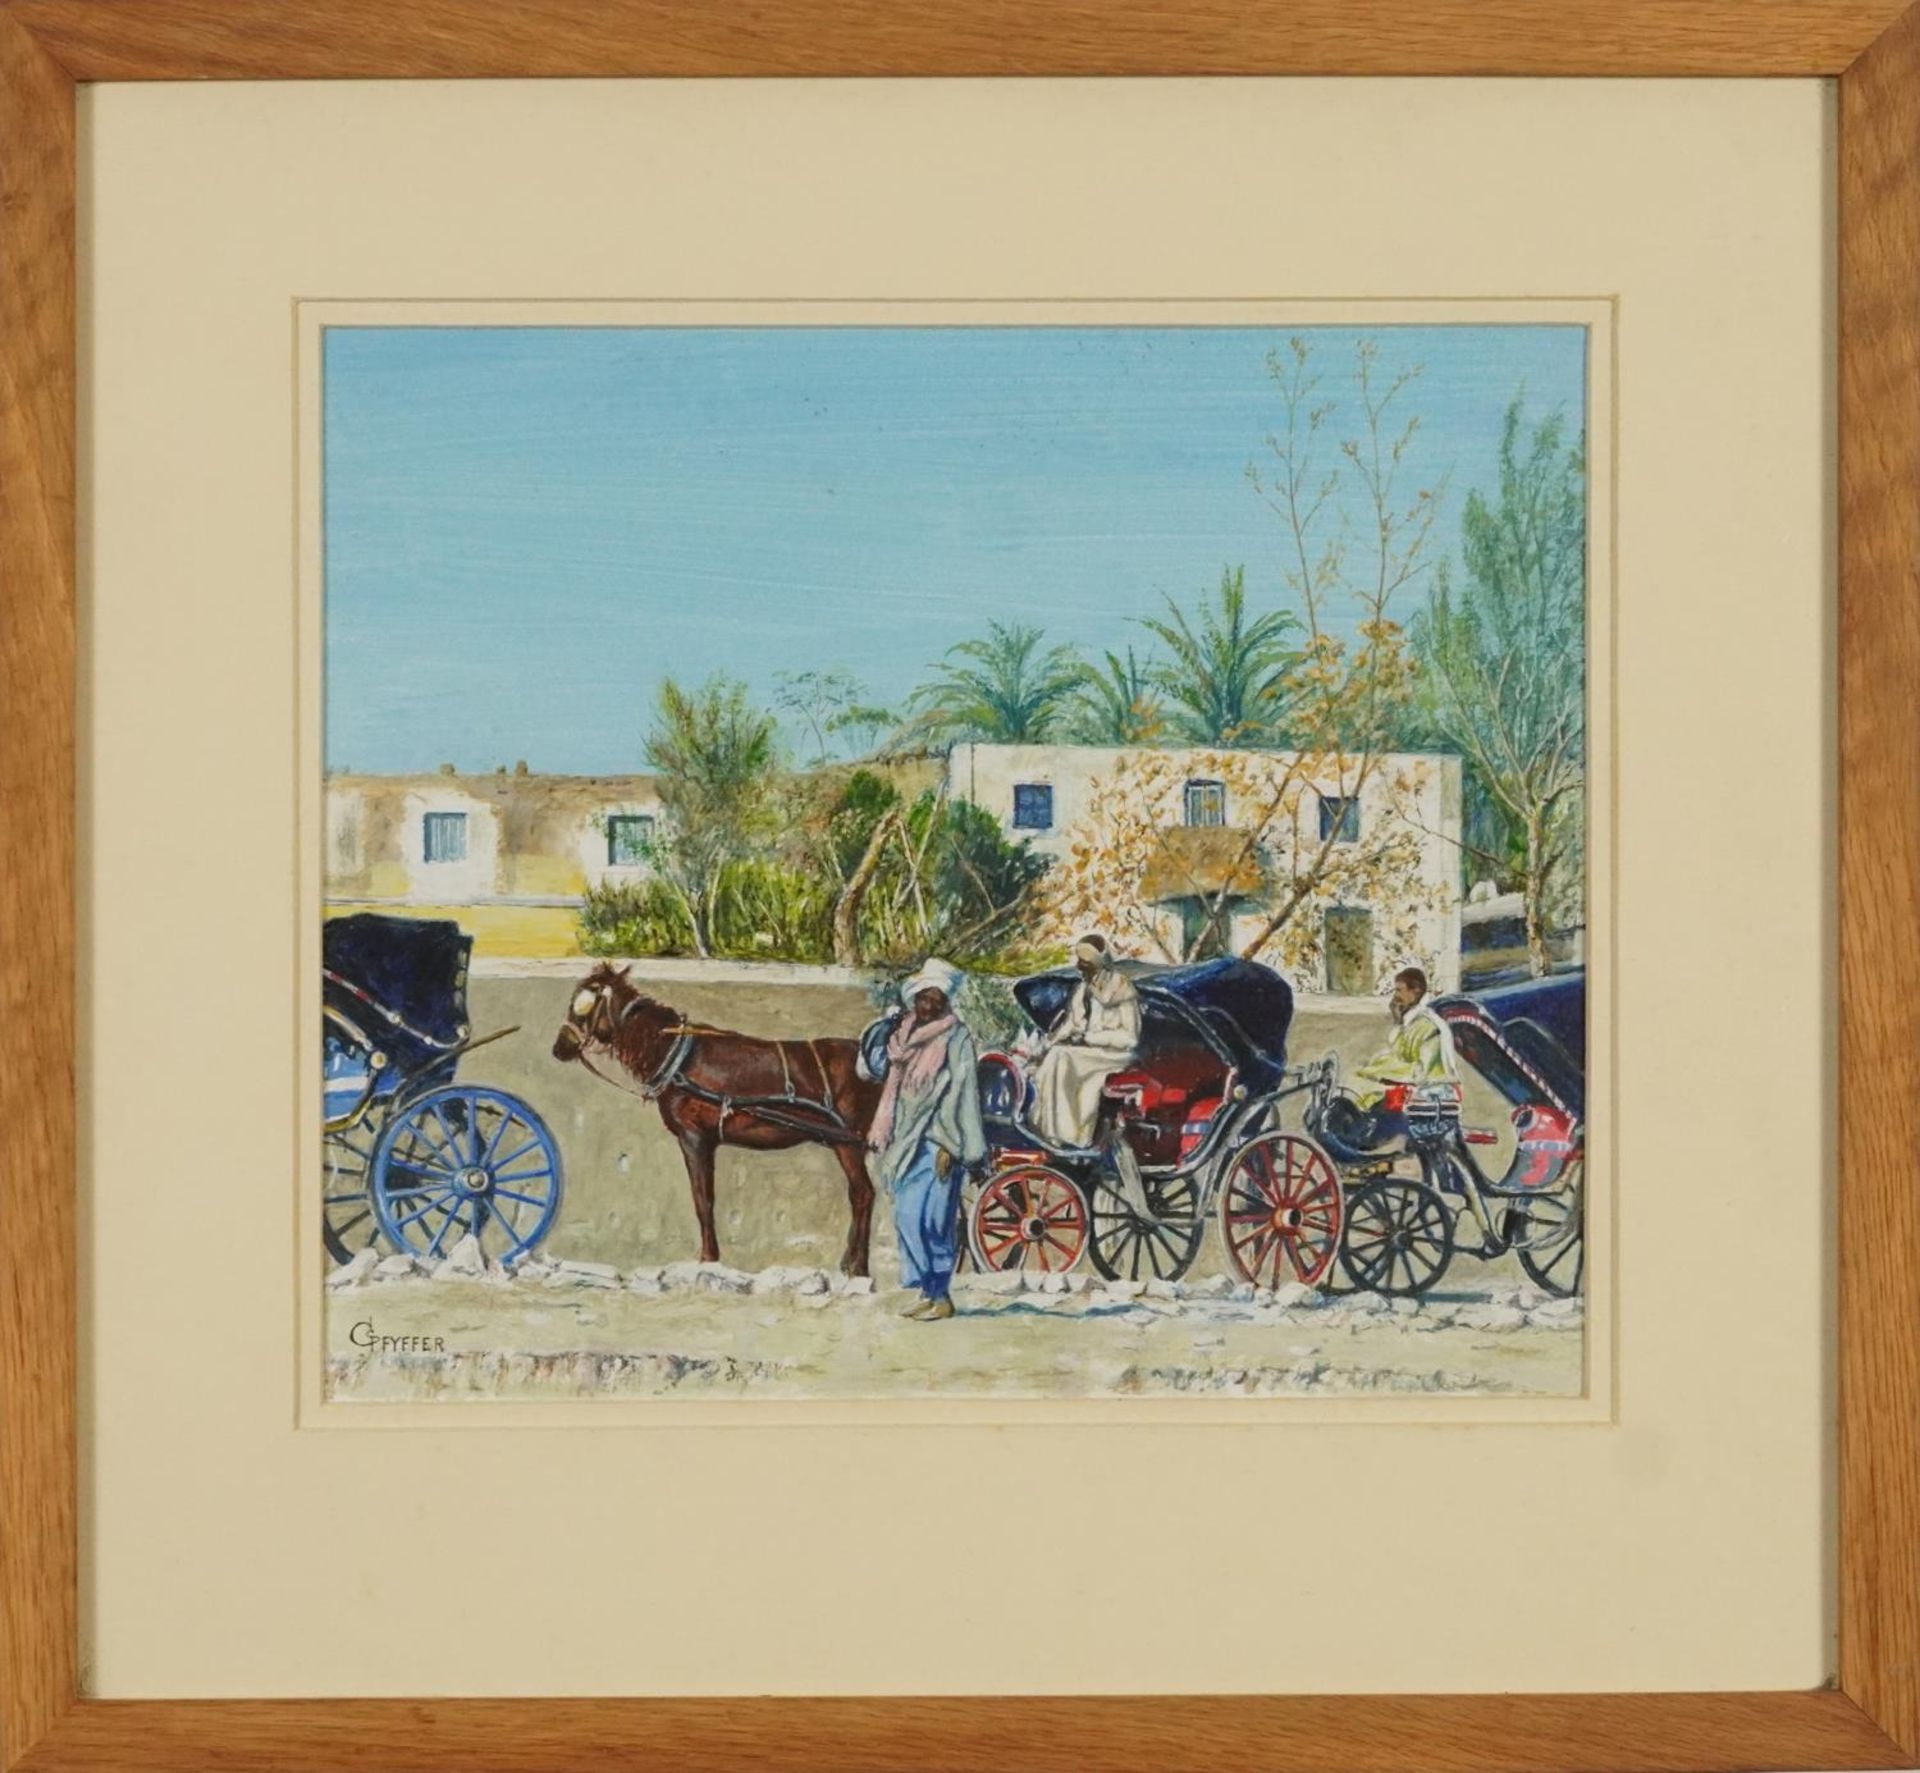 Gordon Pfyffer - Egyptian taxis, Luxor, mixed media, inscribed Gallery label verso, mounted, - Image 2 of 5